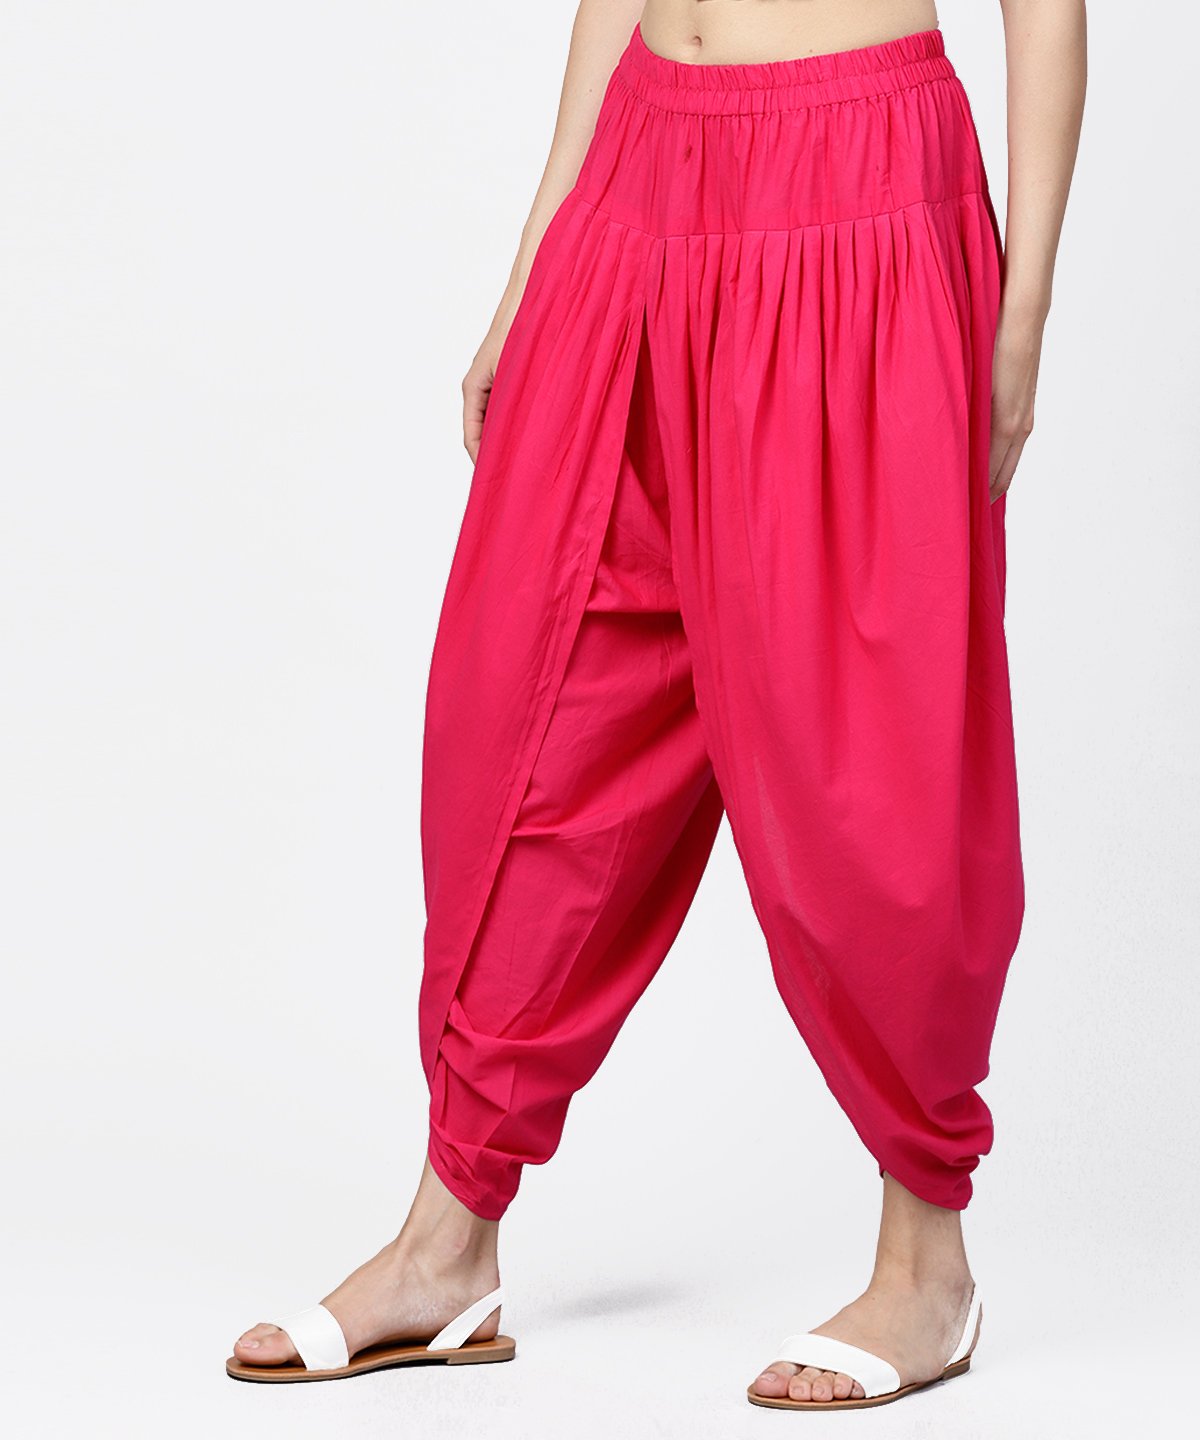 Women's Solid Rani Pink Ankle Length Cotton Dhoti Pant - Nayo Clothing